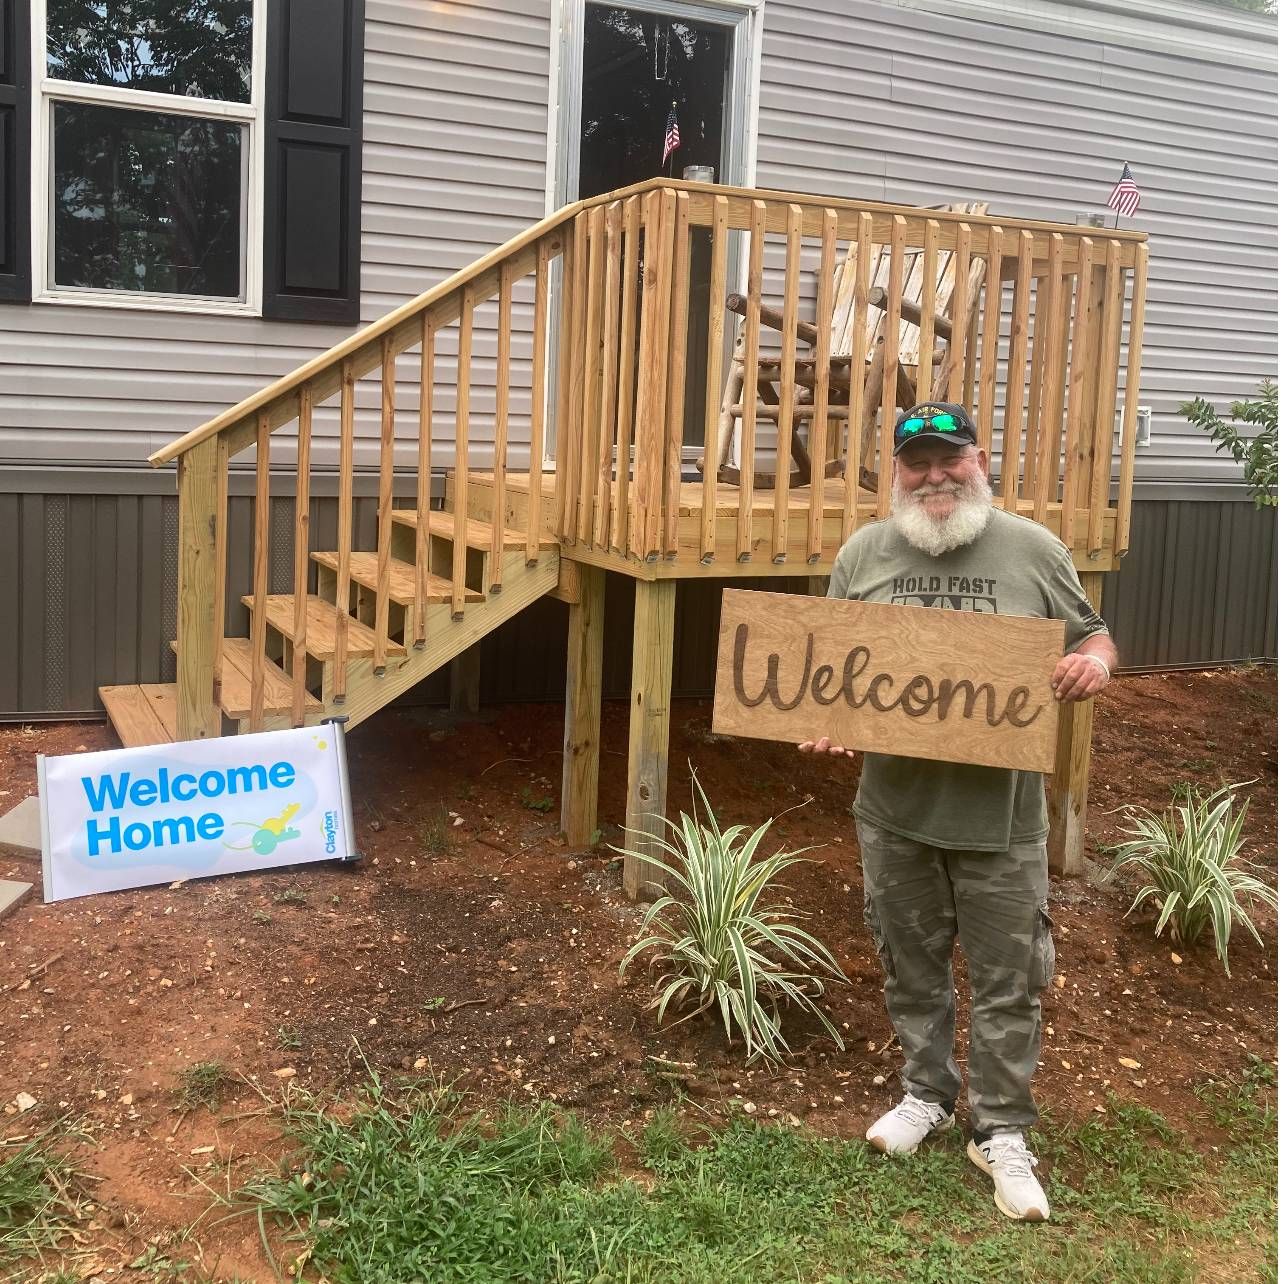 MATTHEW H. welcome home image